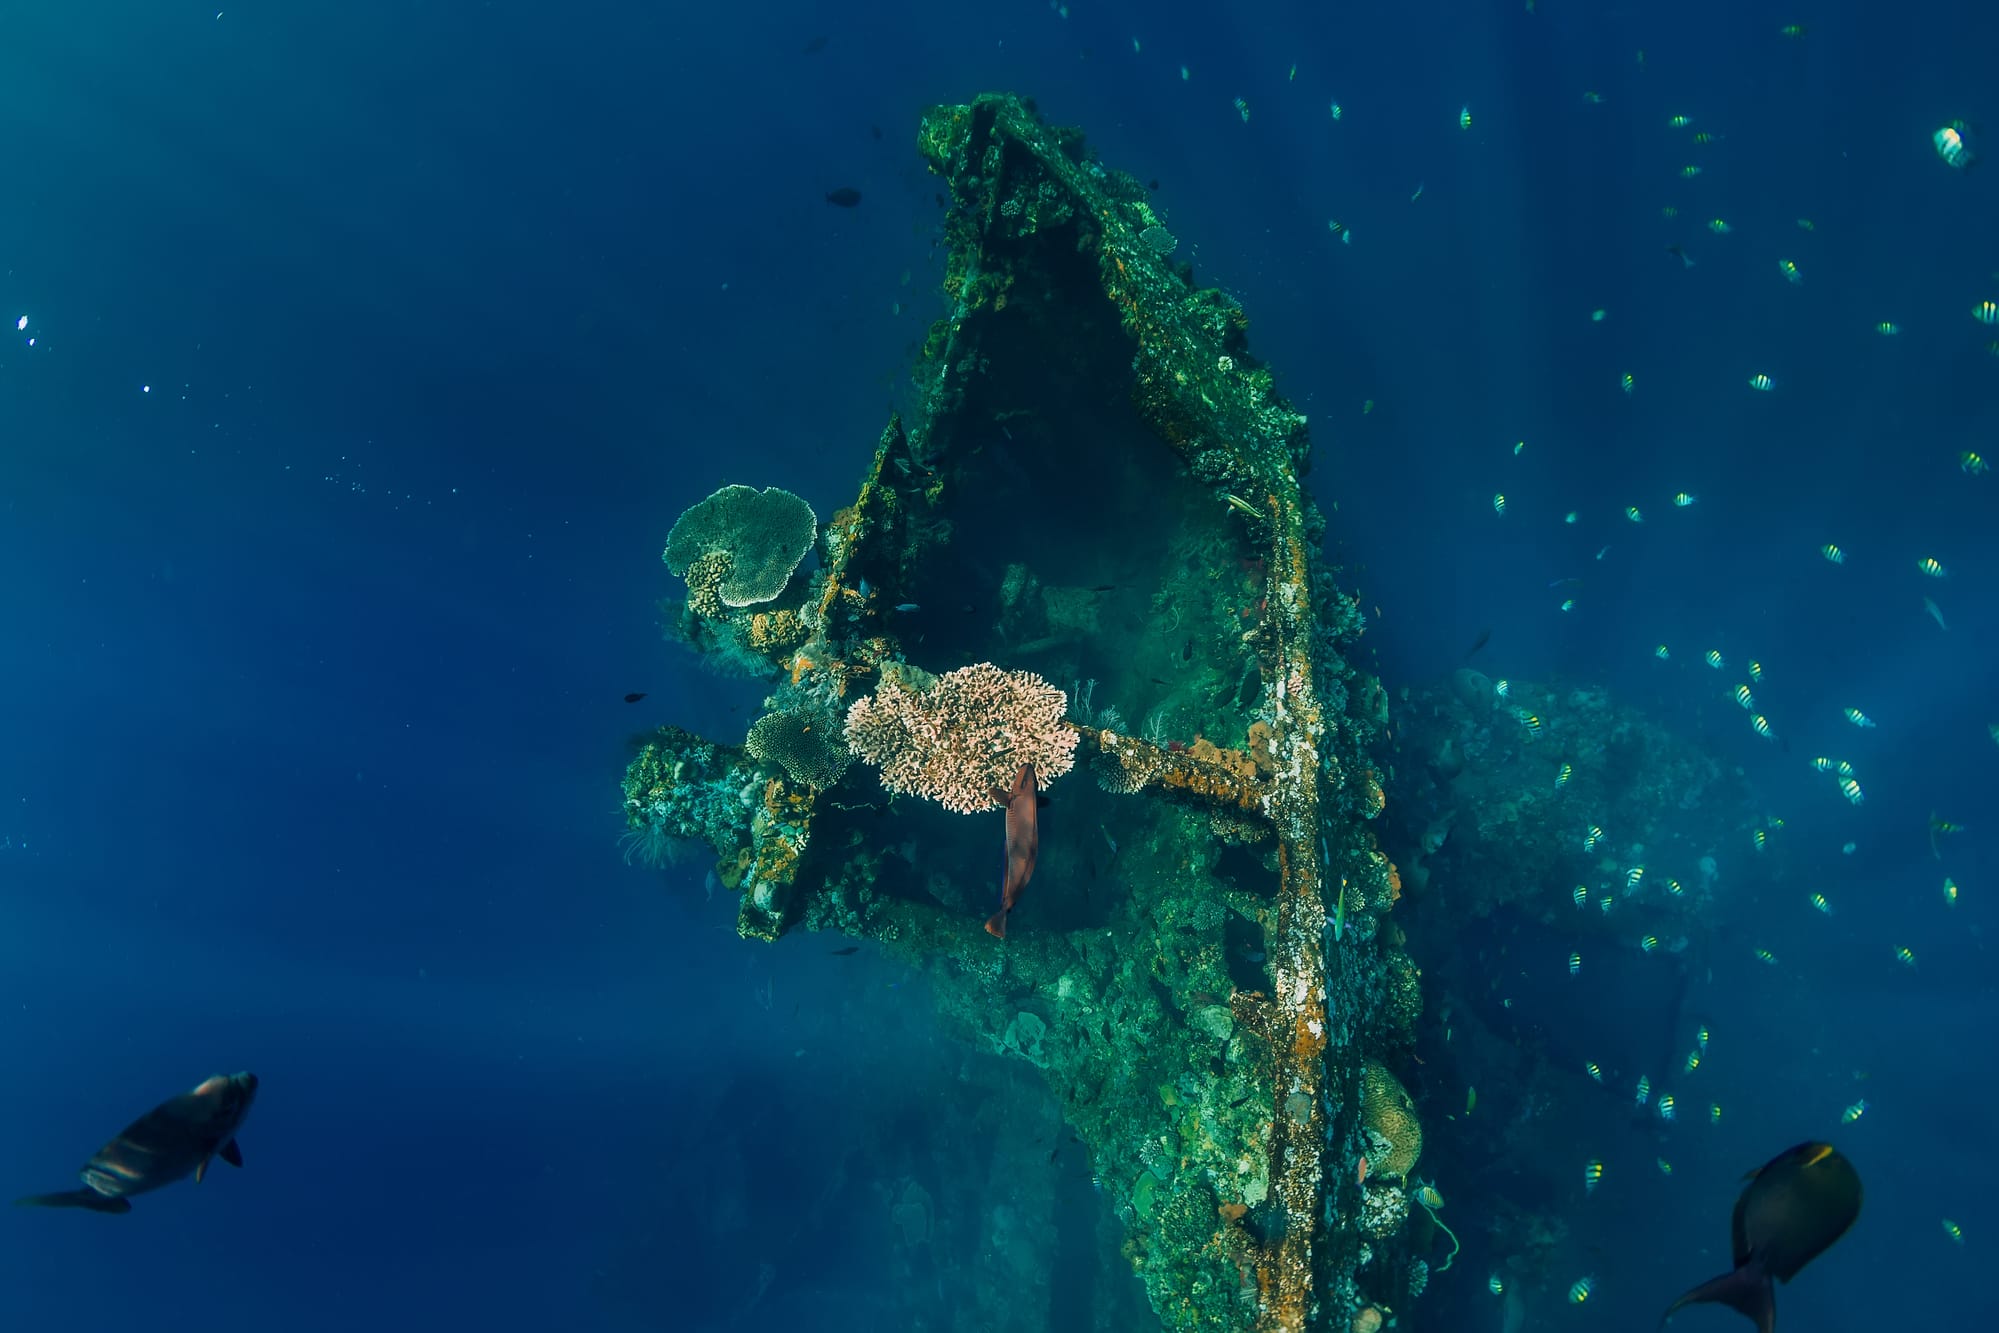 Underwater wrecks to discover in the world